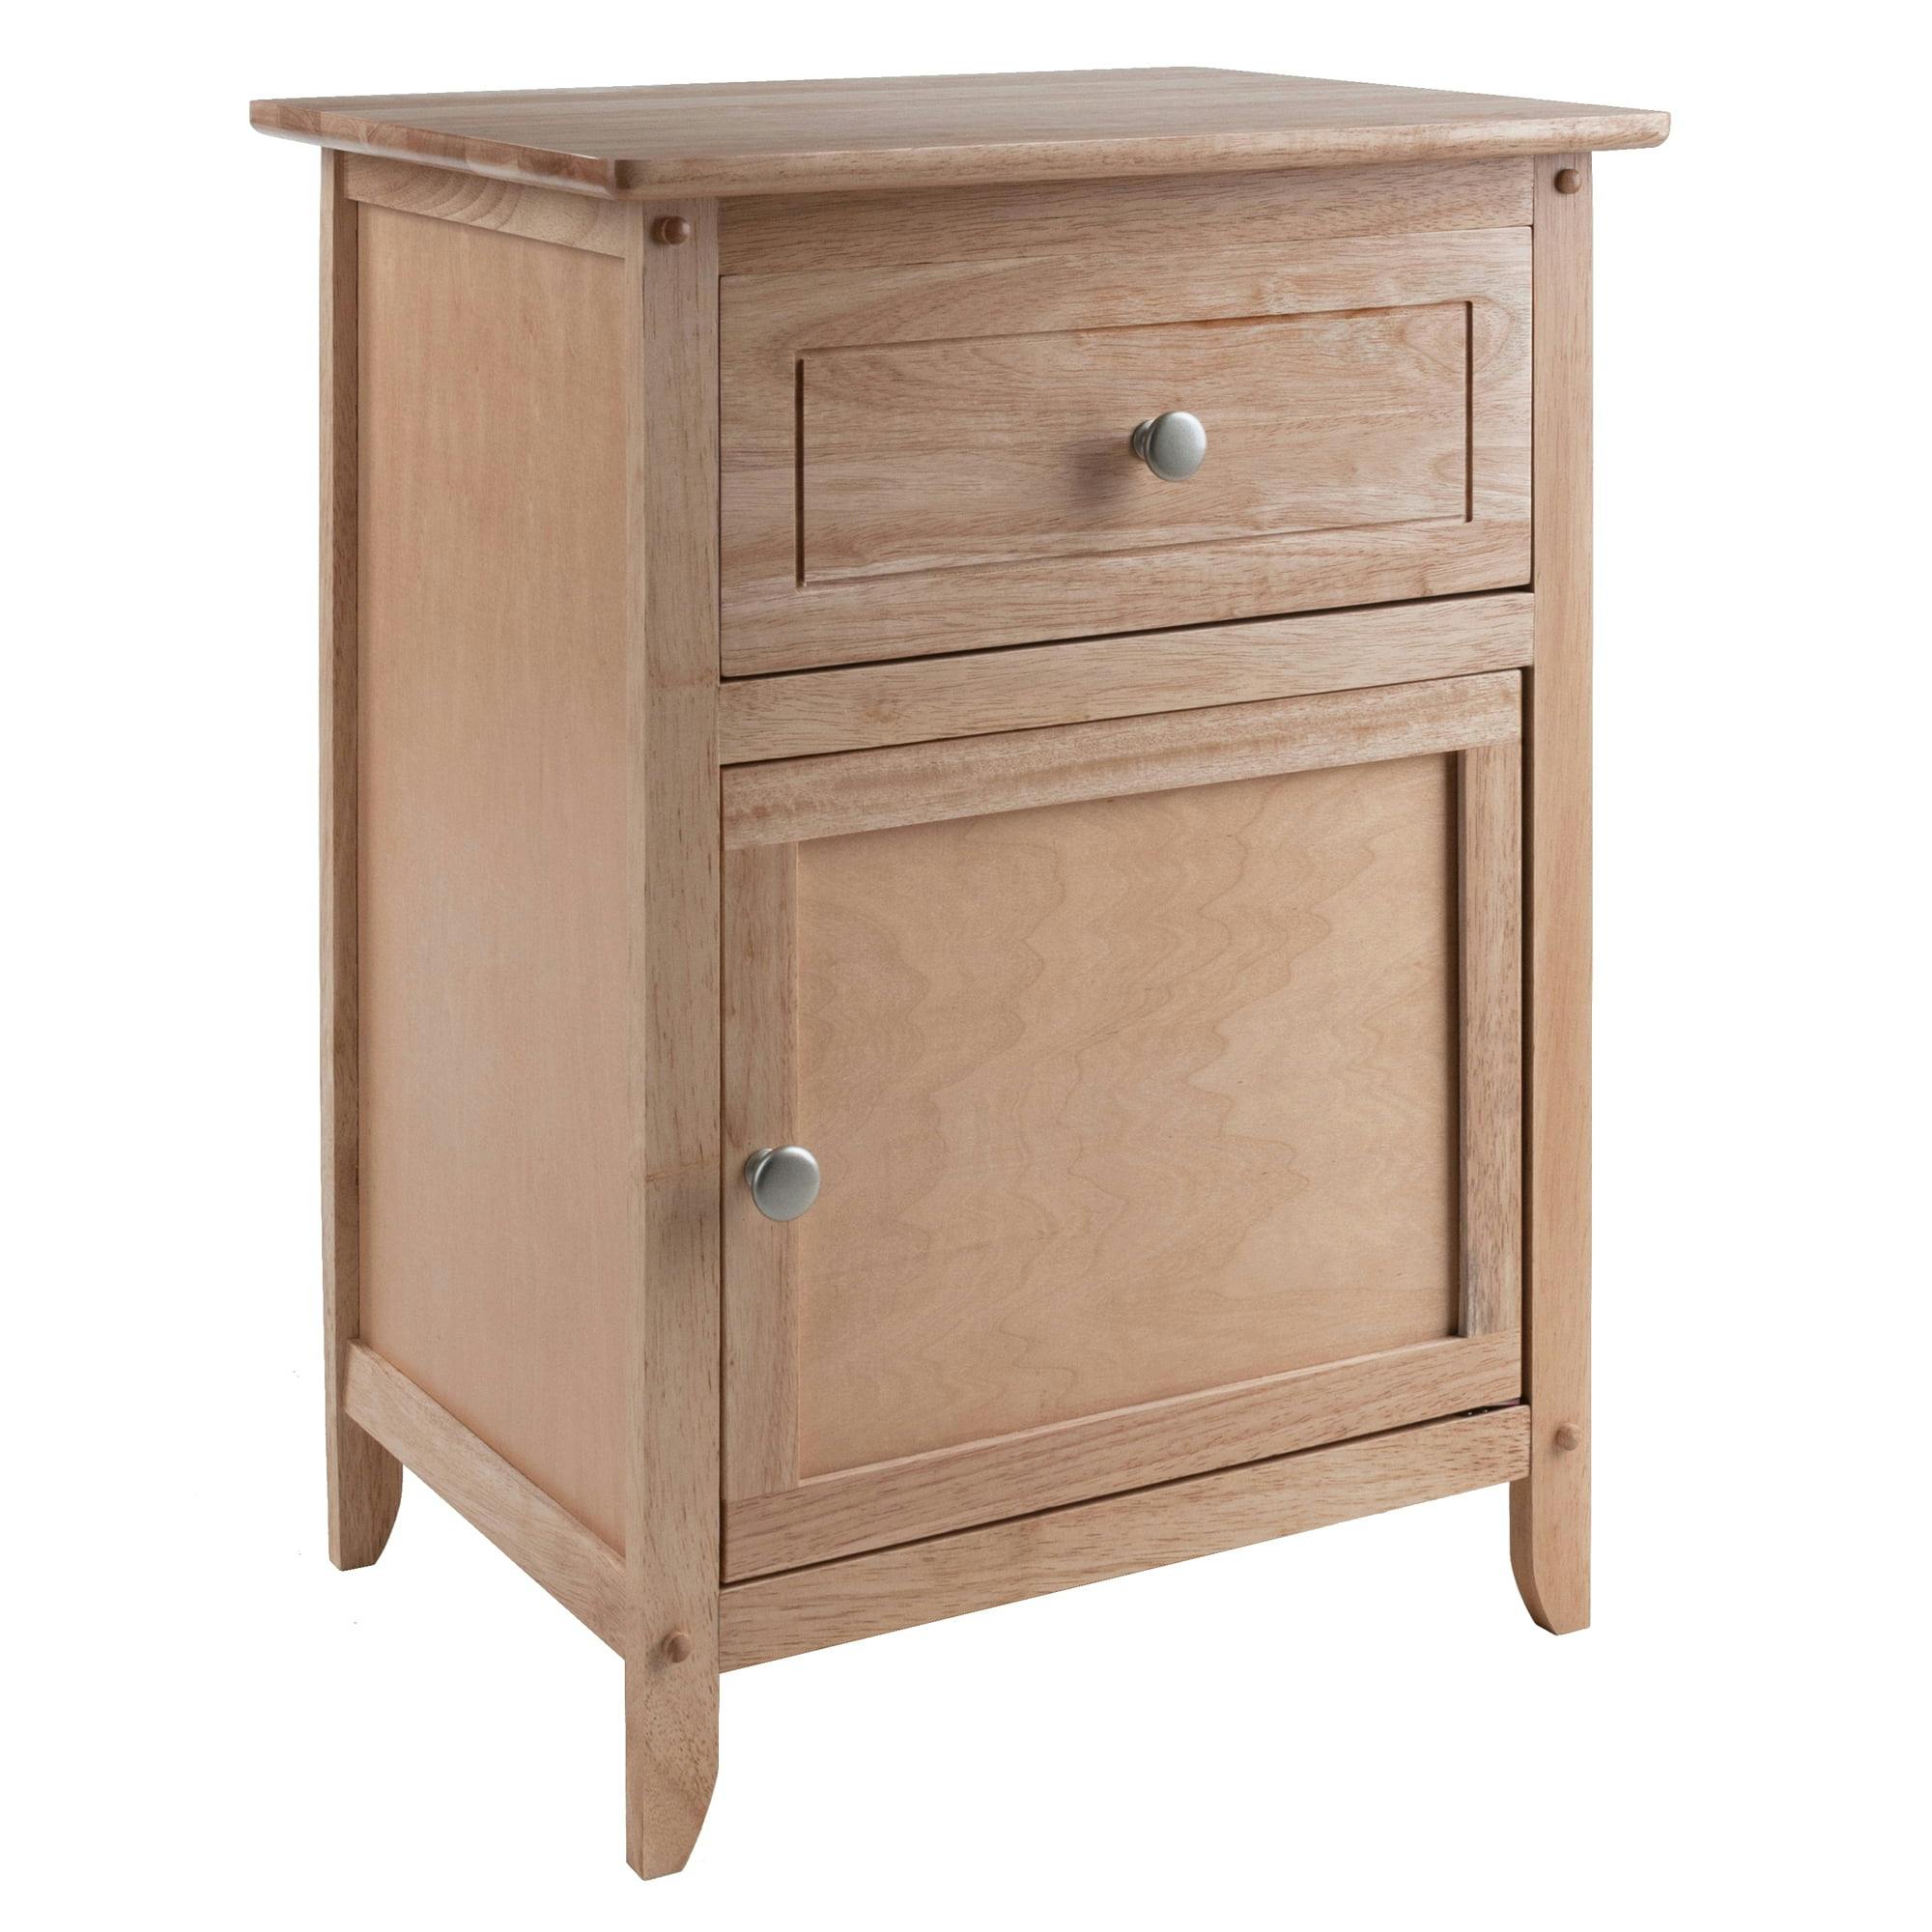 Transitional Beechwood Rectangular Nightstand with Drawer and Cabinet